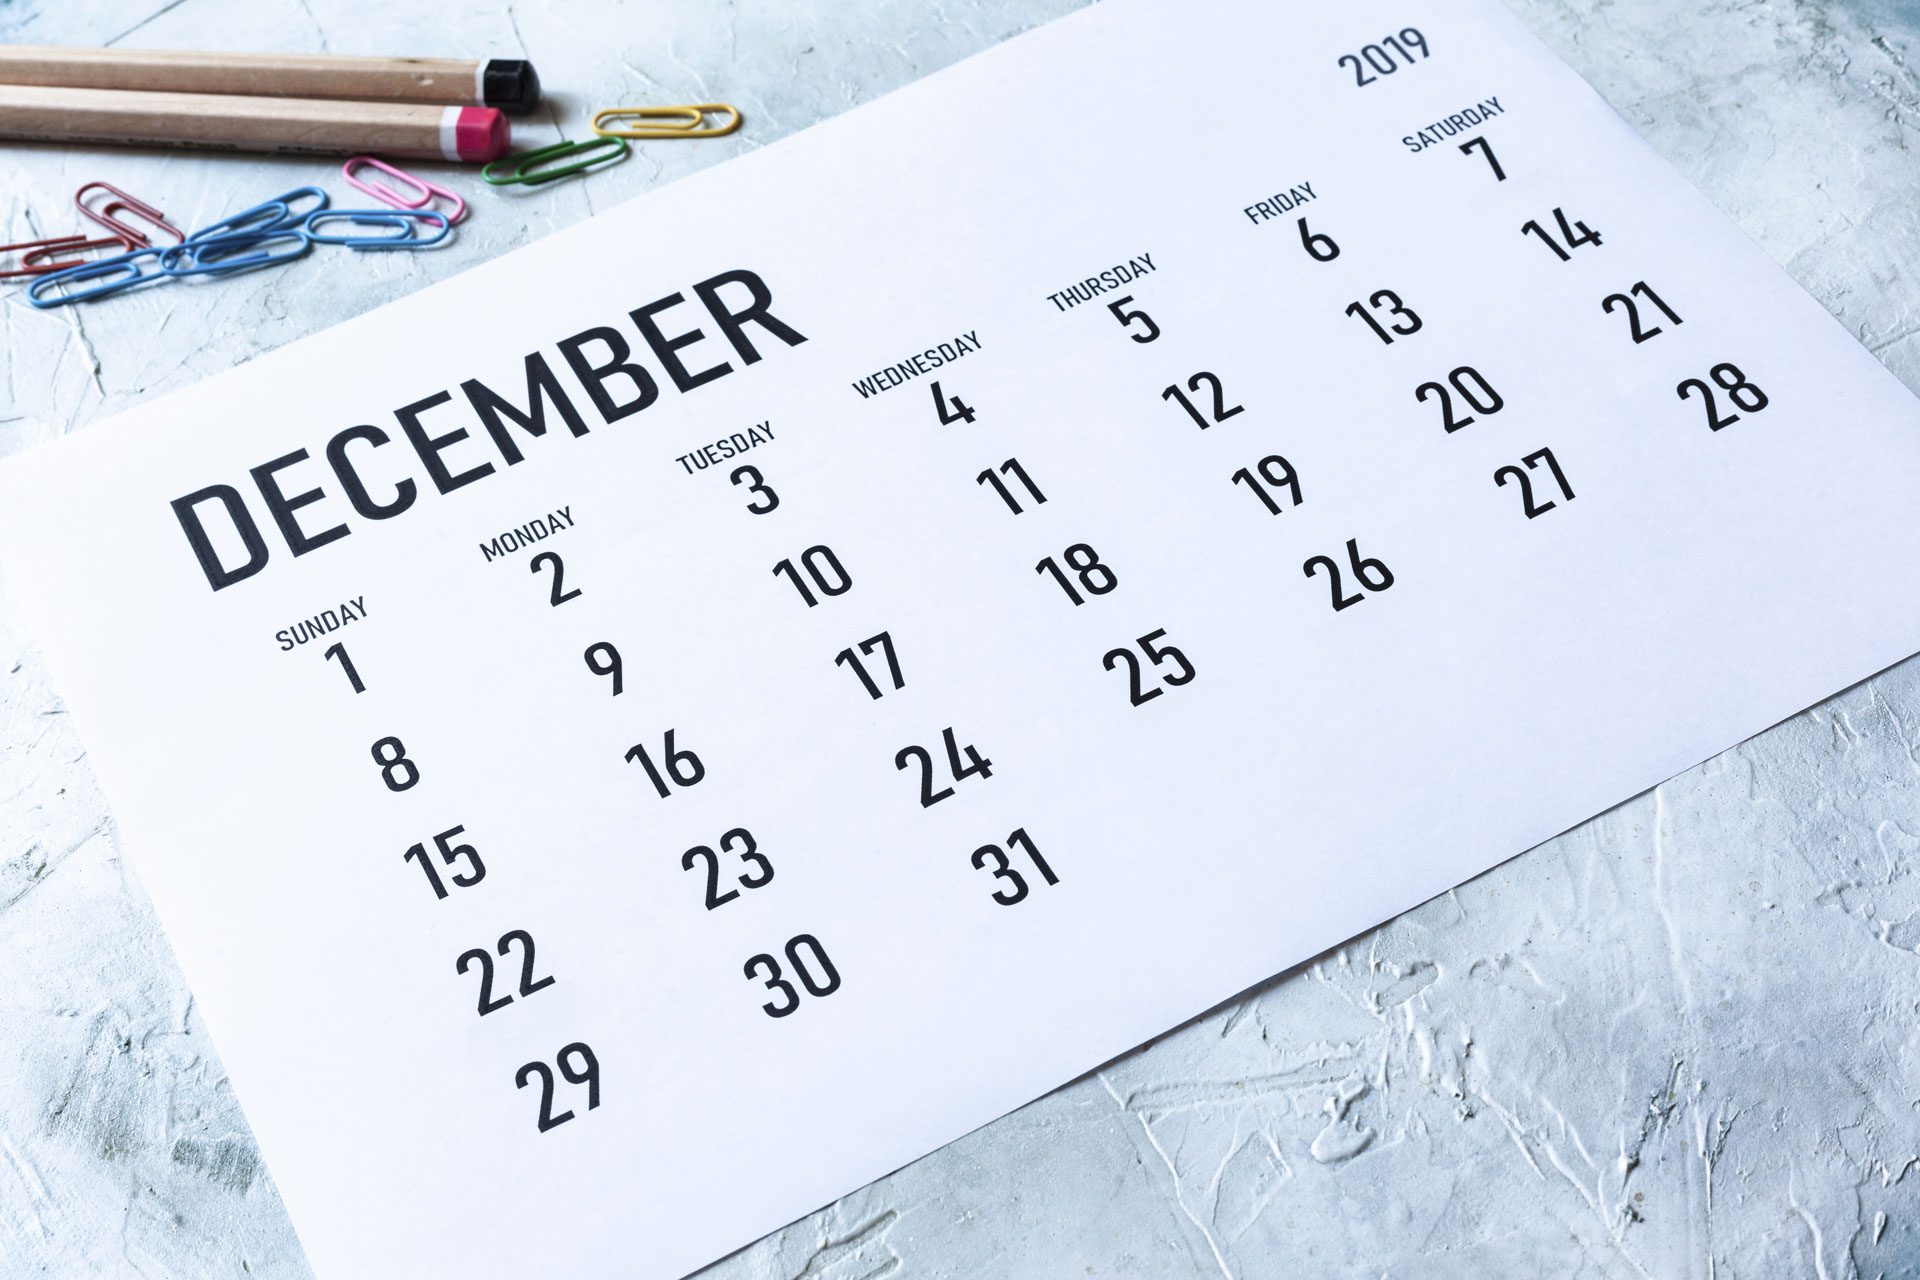 Simple 2019 December monthly calendar on table with office supplies